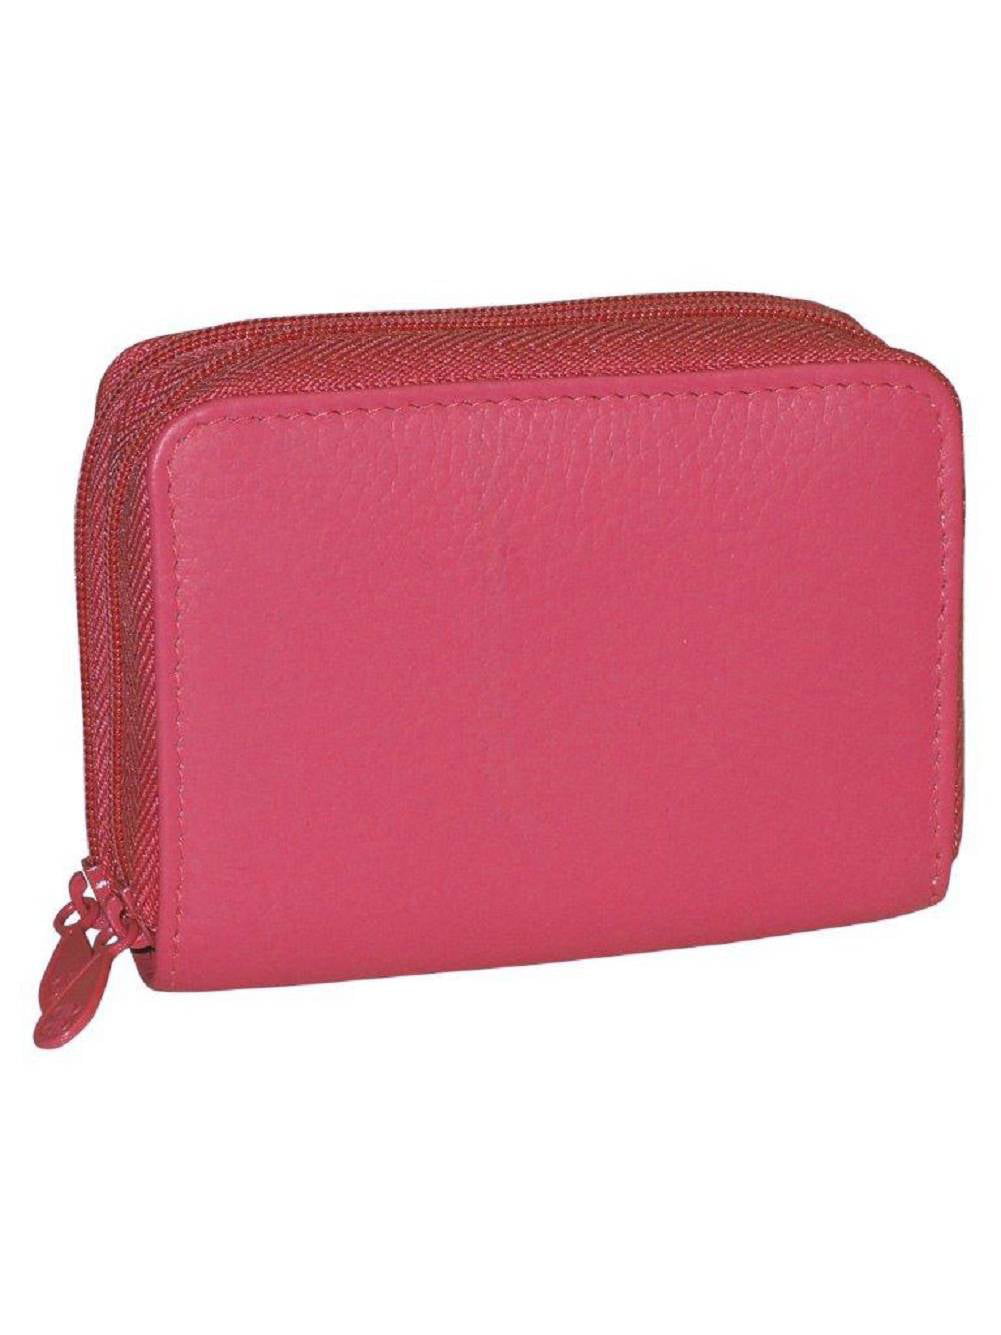 Ladies Buxton Wizard Leather Credit Card ID Wallet,Hot Pink